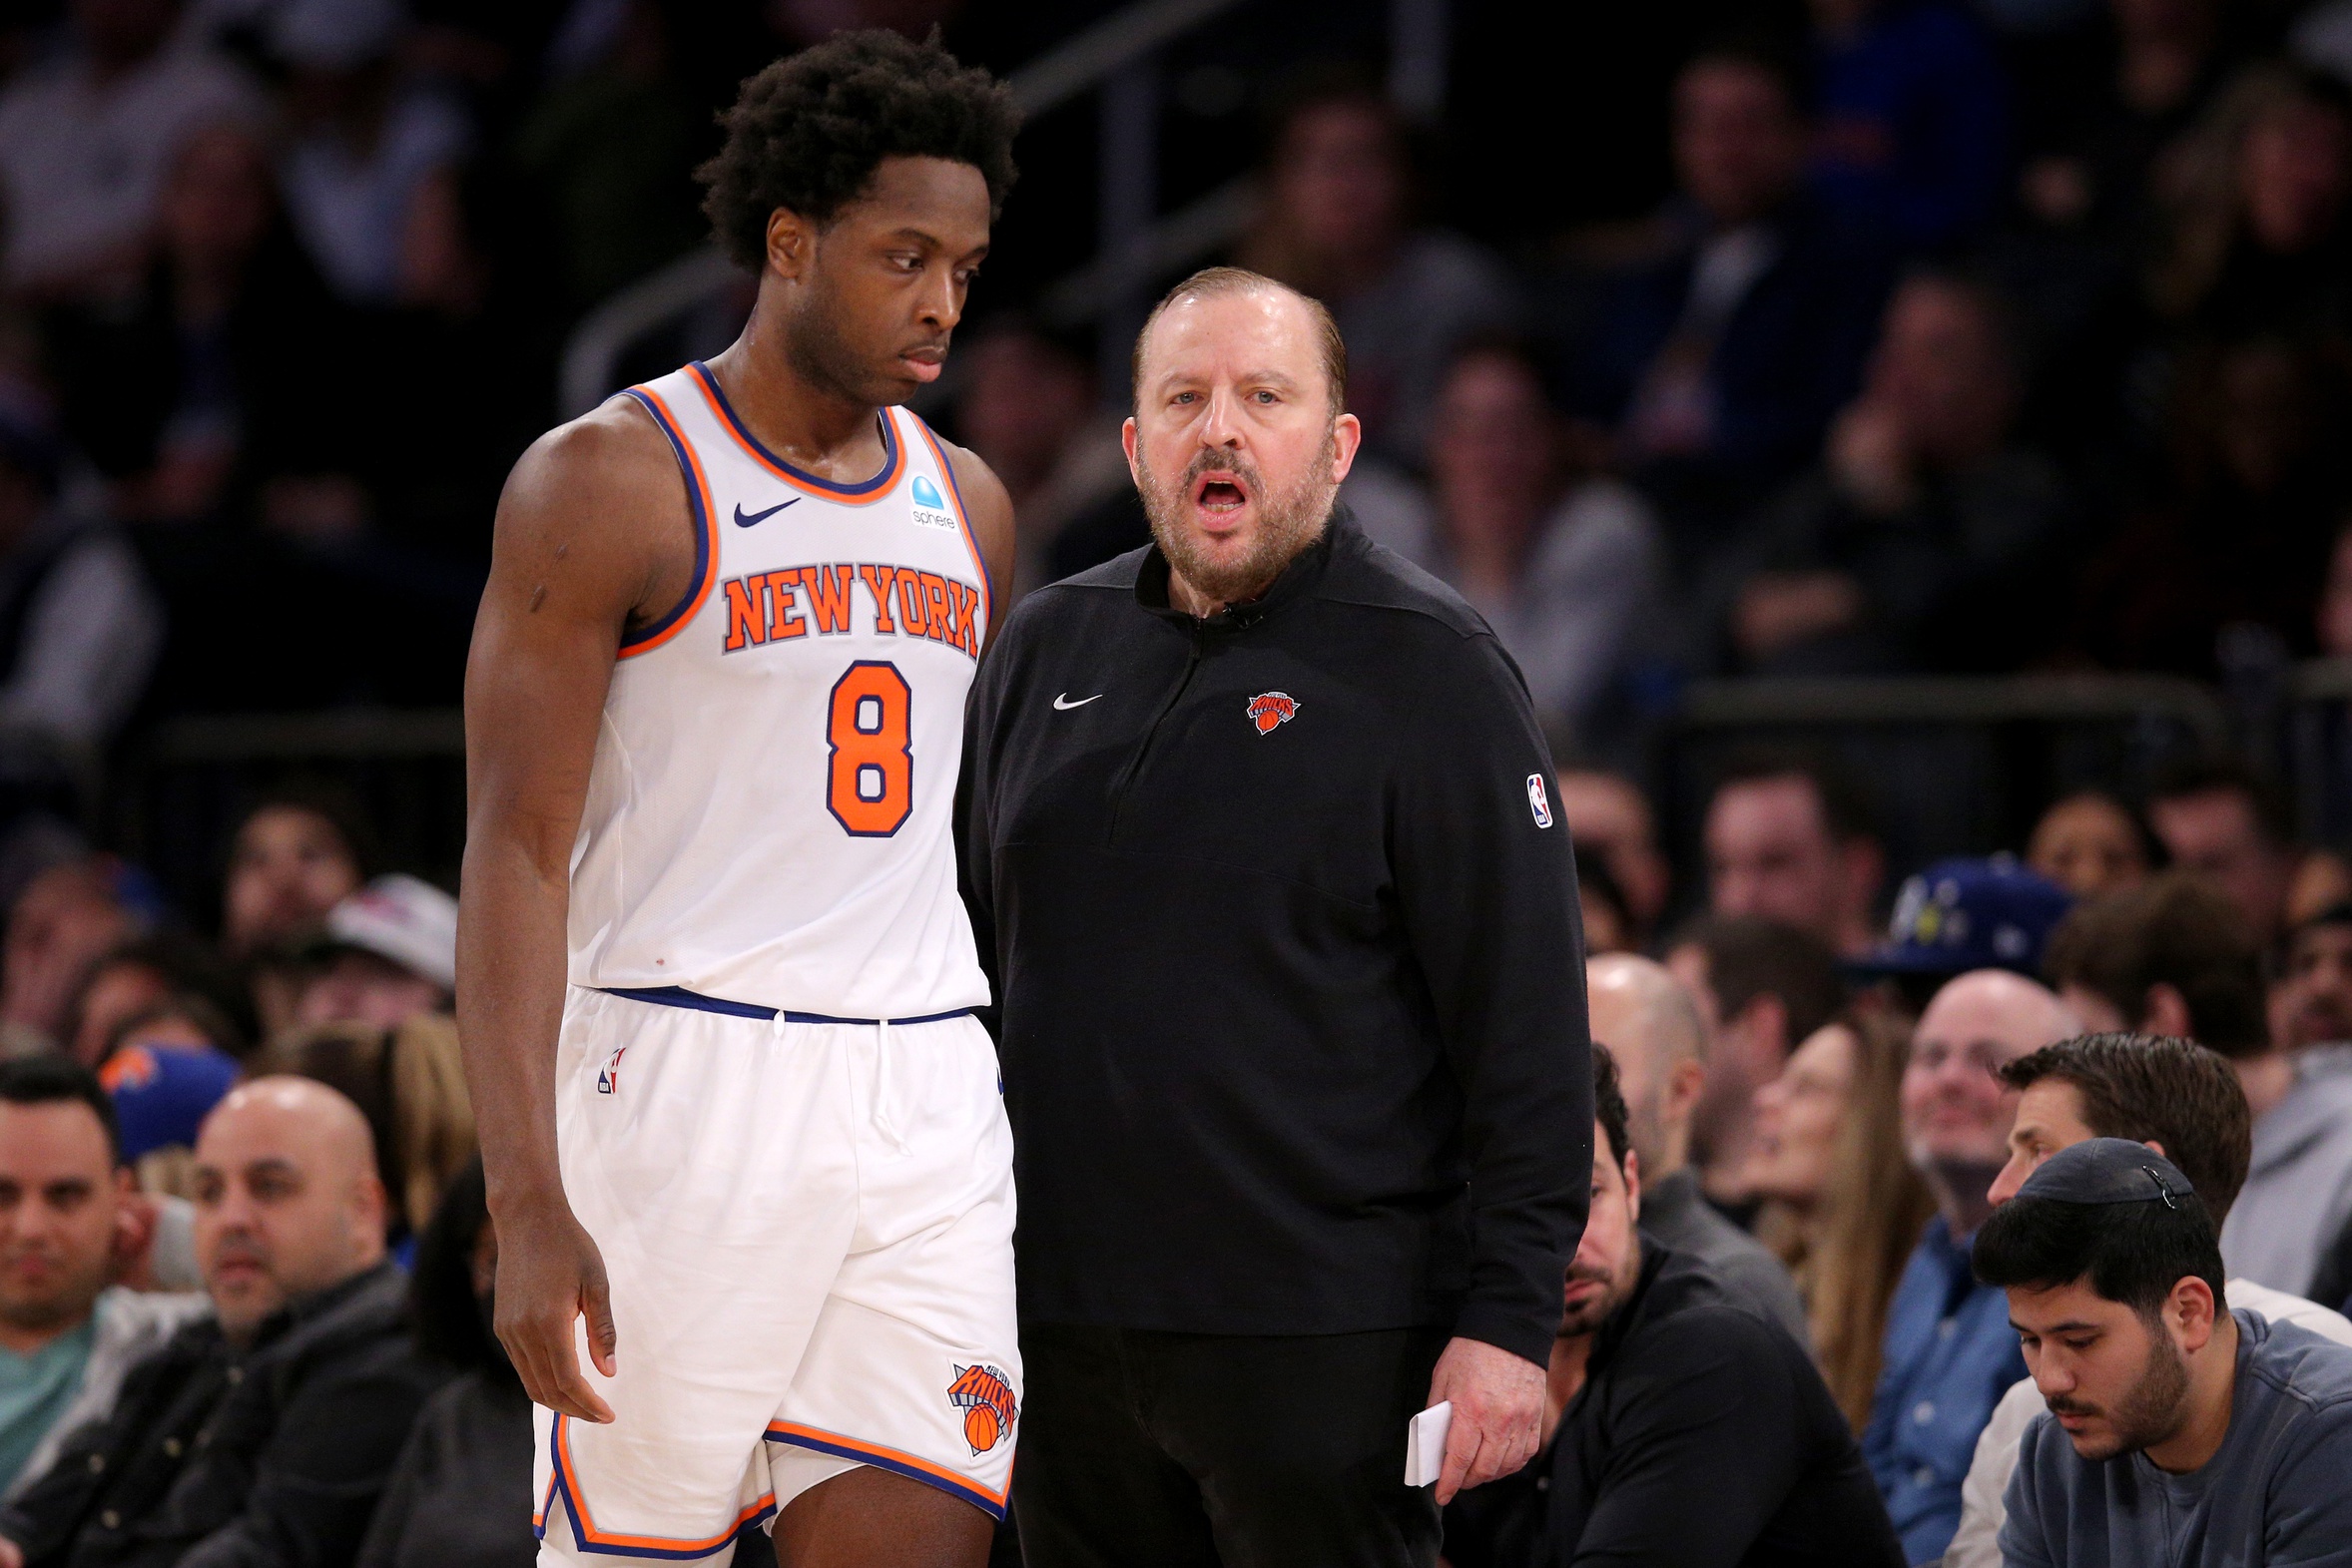 New York Knicks head coach Tom Thibodeau talks to forward OG Anunoby (8) during the fourth quarter against the Chicago Bulls at Madison Square Garden.